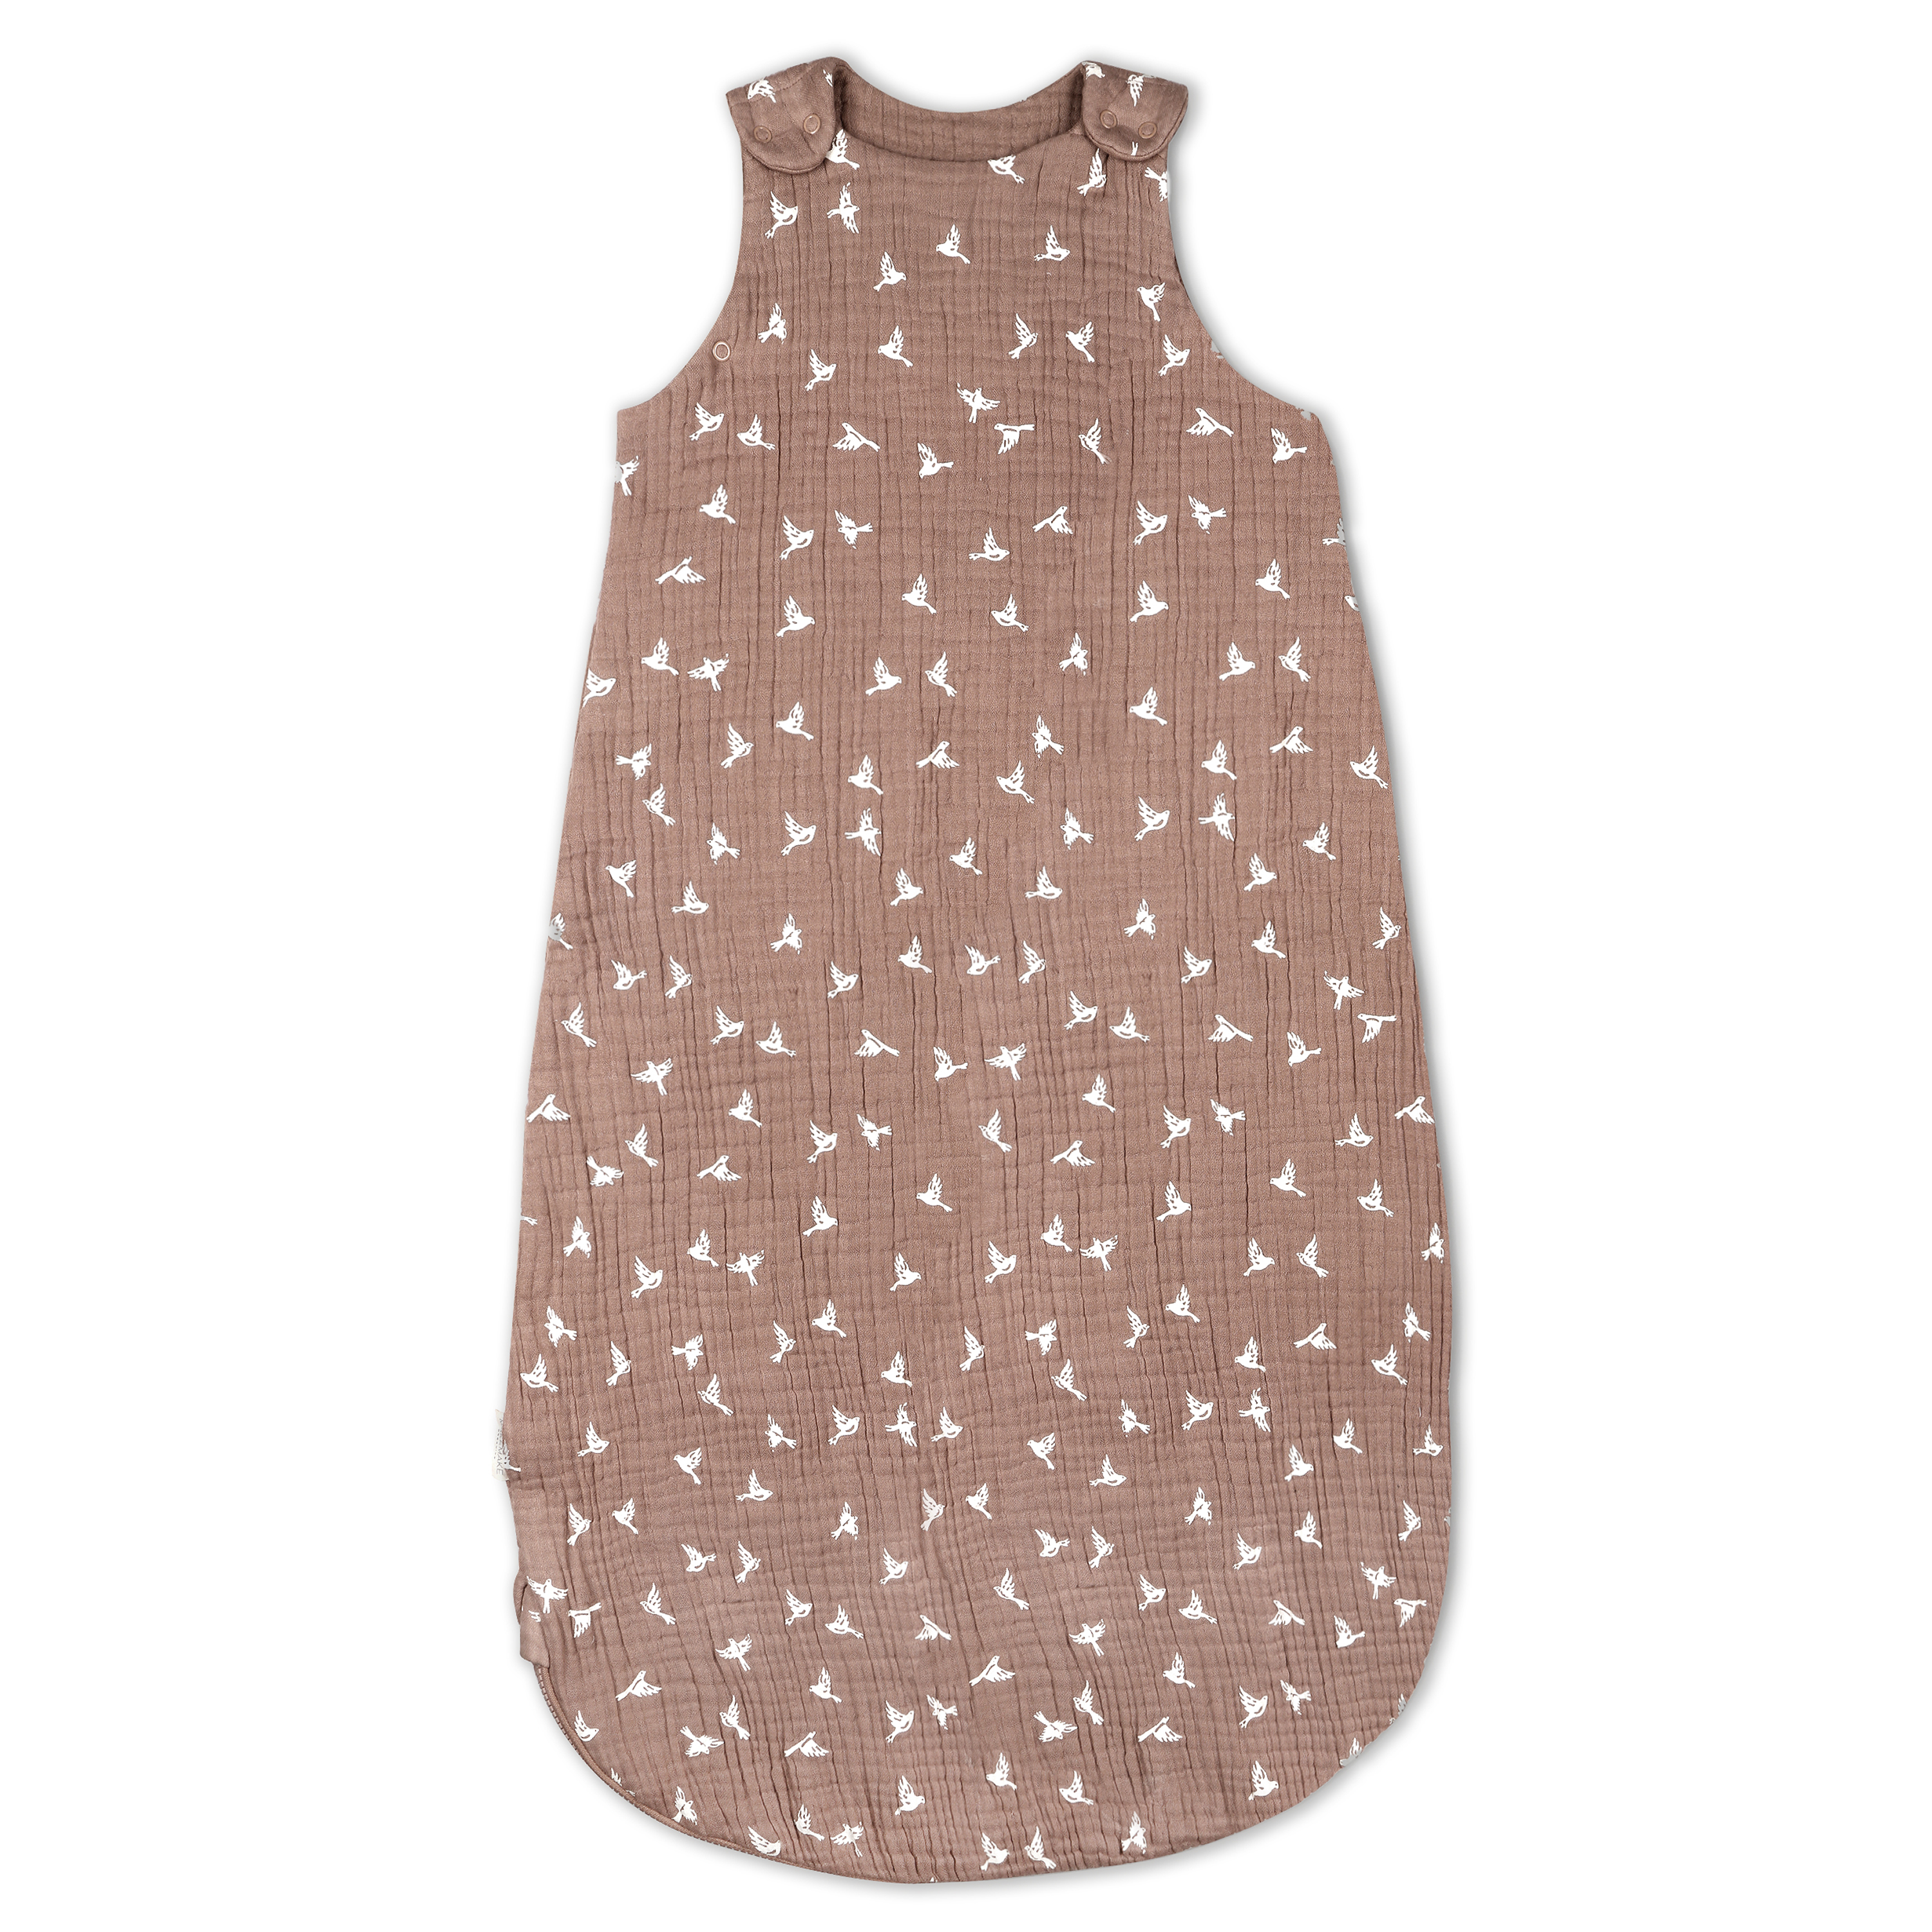 A brown toddler Muslin Wearable Blanket - Flock with a white origami bird pattern, displayed flat with shoulder snaps visible at the top from Makemake Organics.